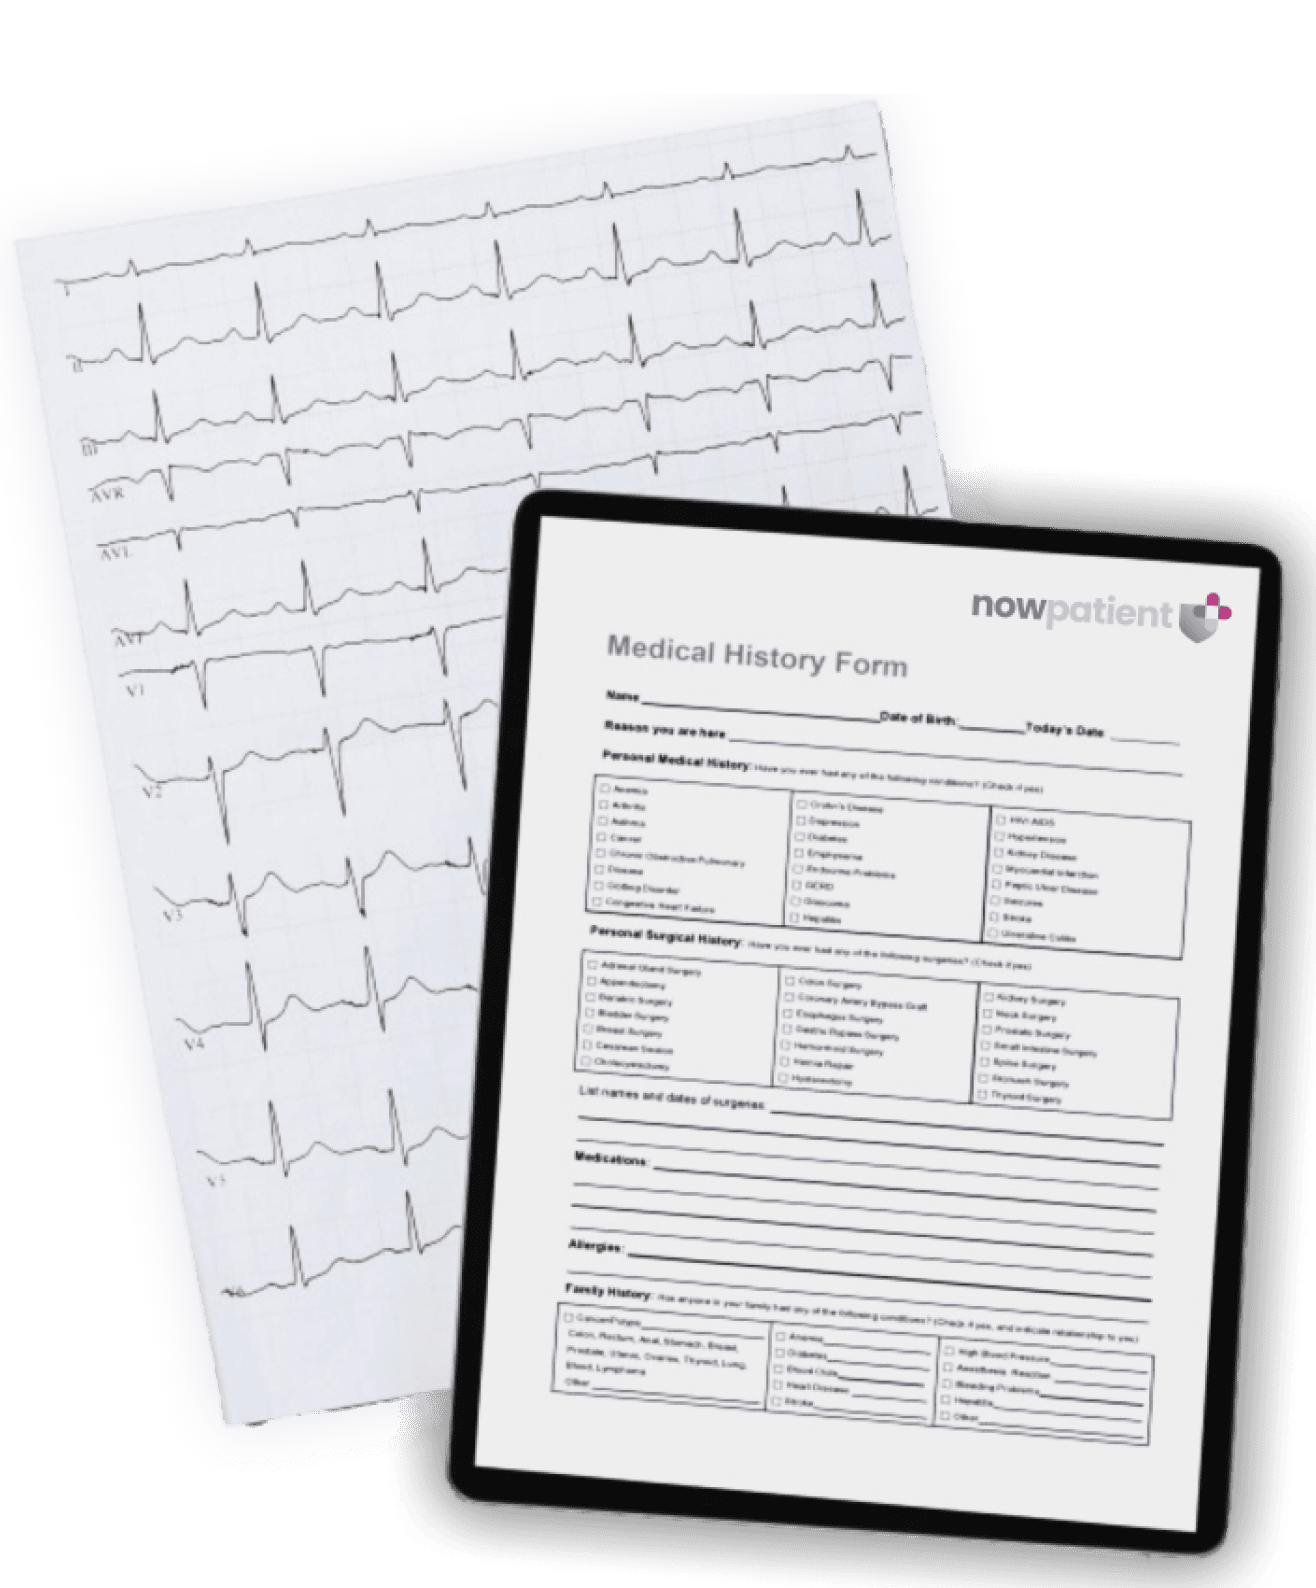 An electrocardiogram (ECG) printout and a "Medical History Form" from NowPatient are placed side by side. The tablet displays the form while the ECG shows heart activity data.